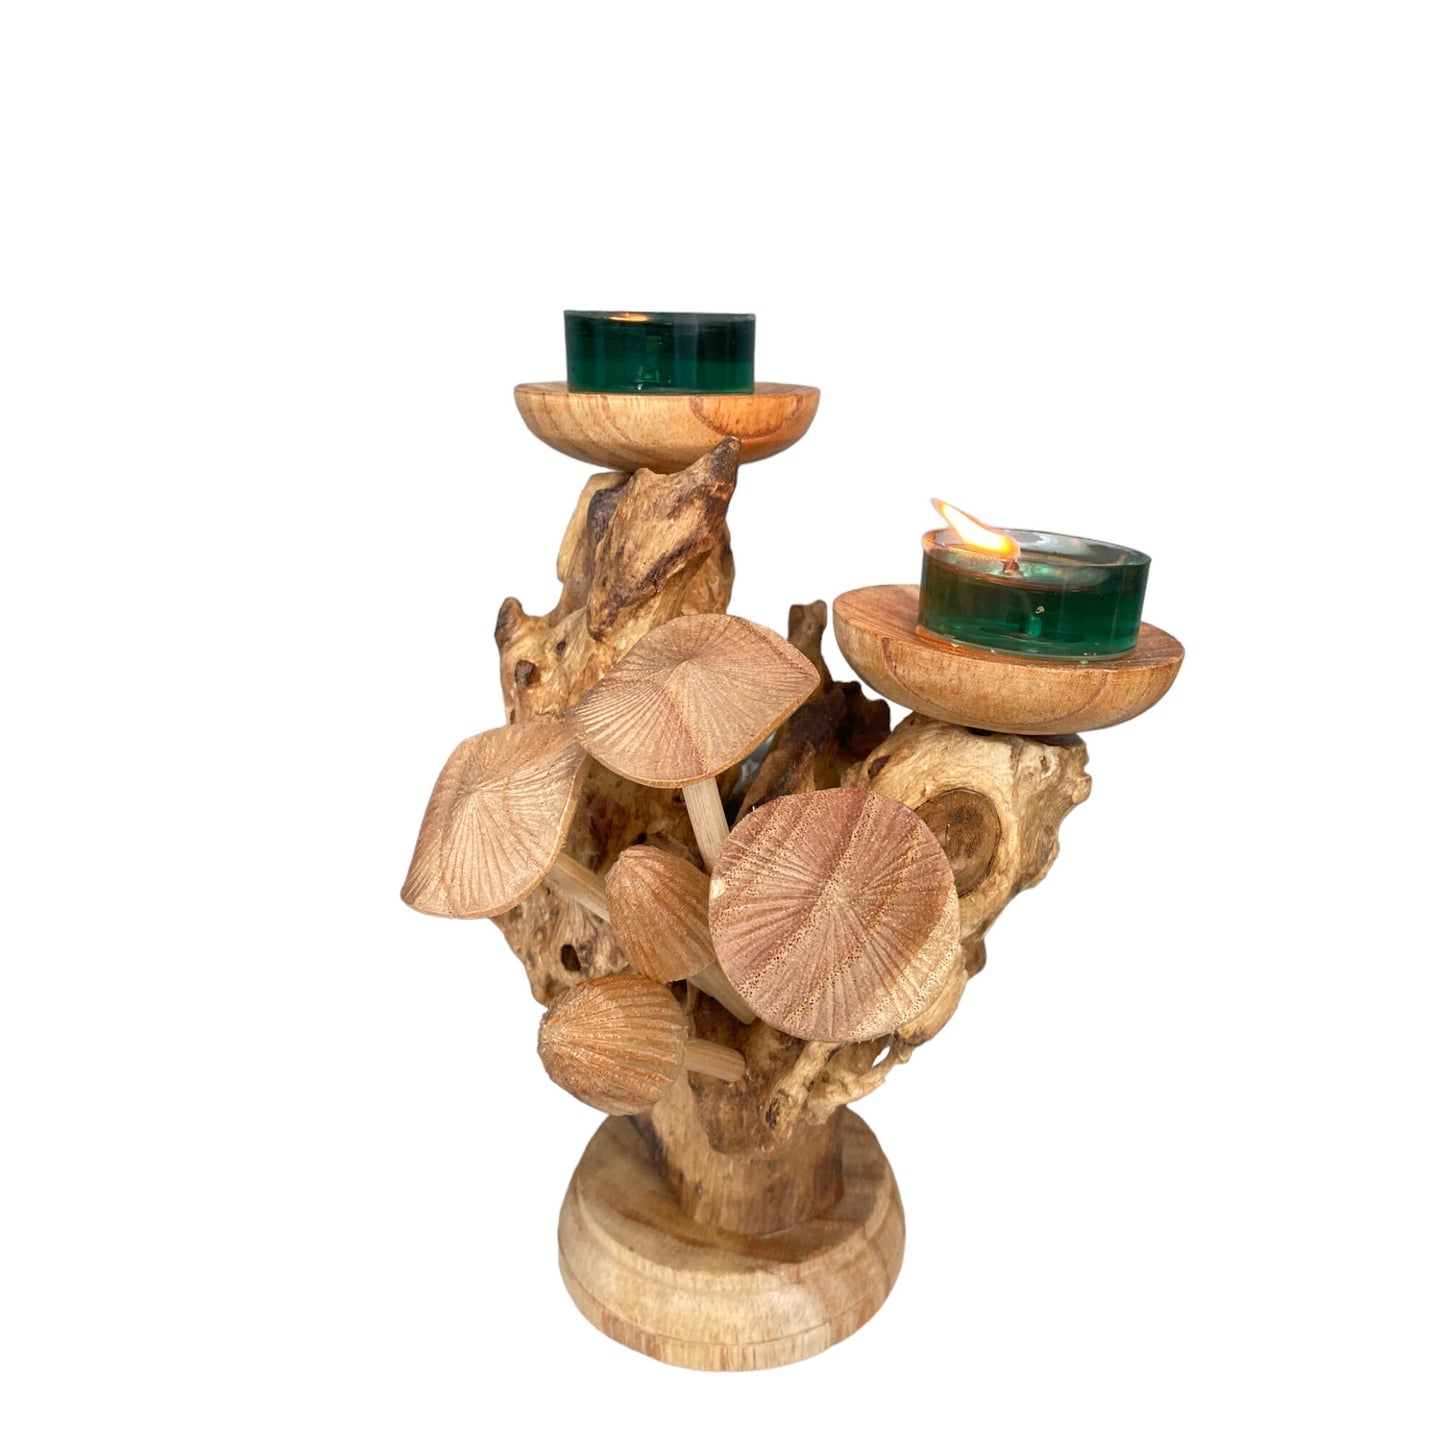 Handcrafted Wooden Candle Holder with Mushroom